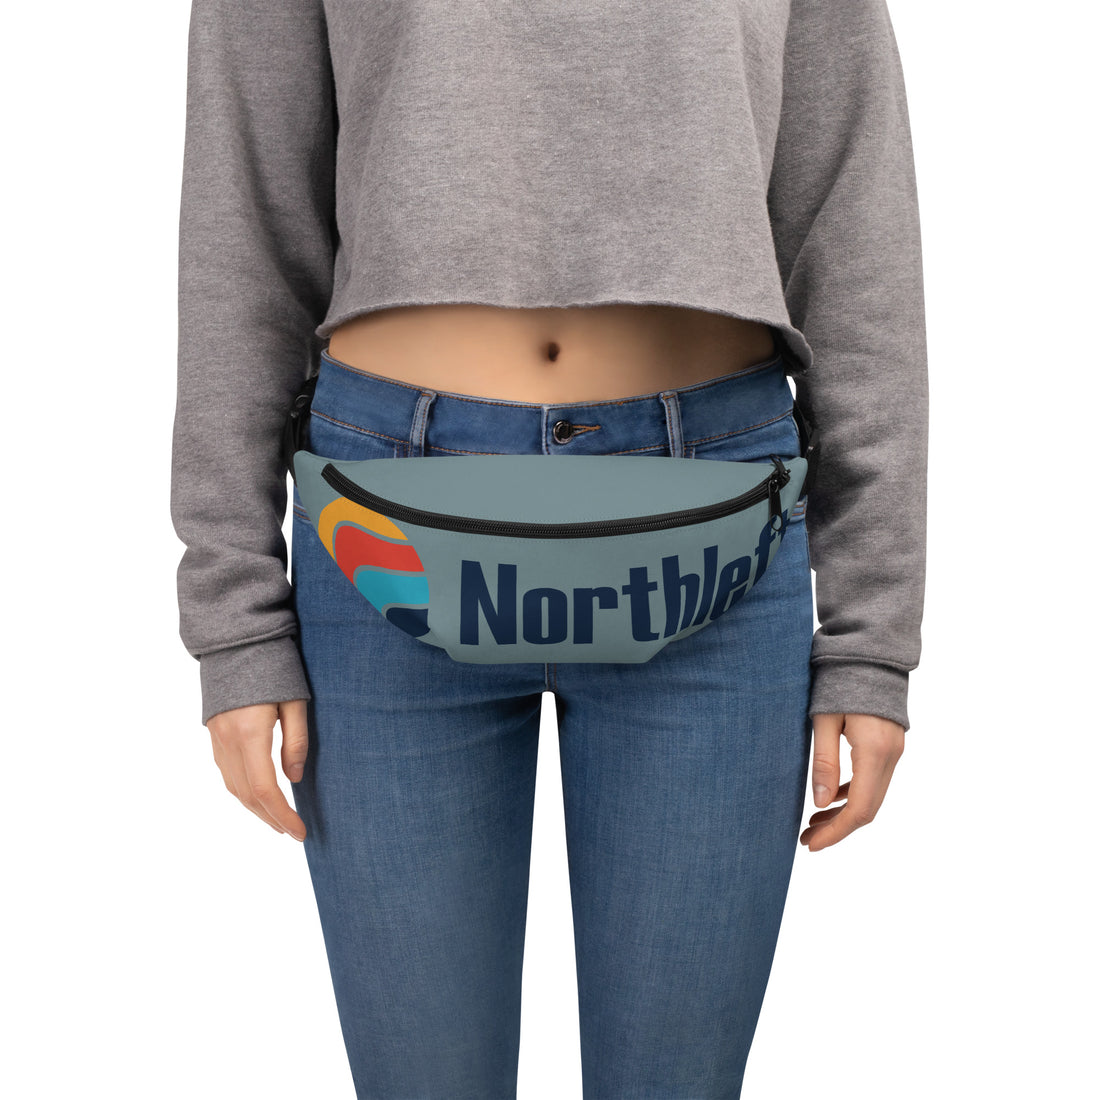 Northleft Fanny Pack